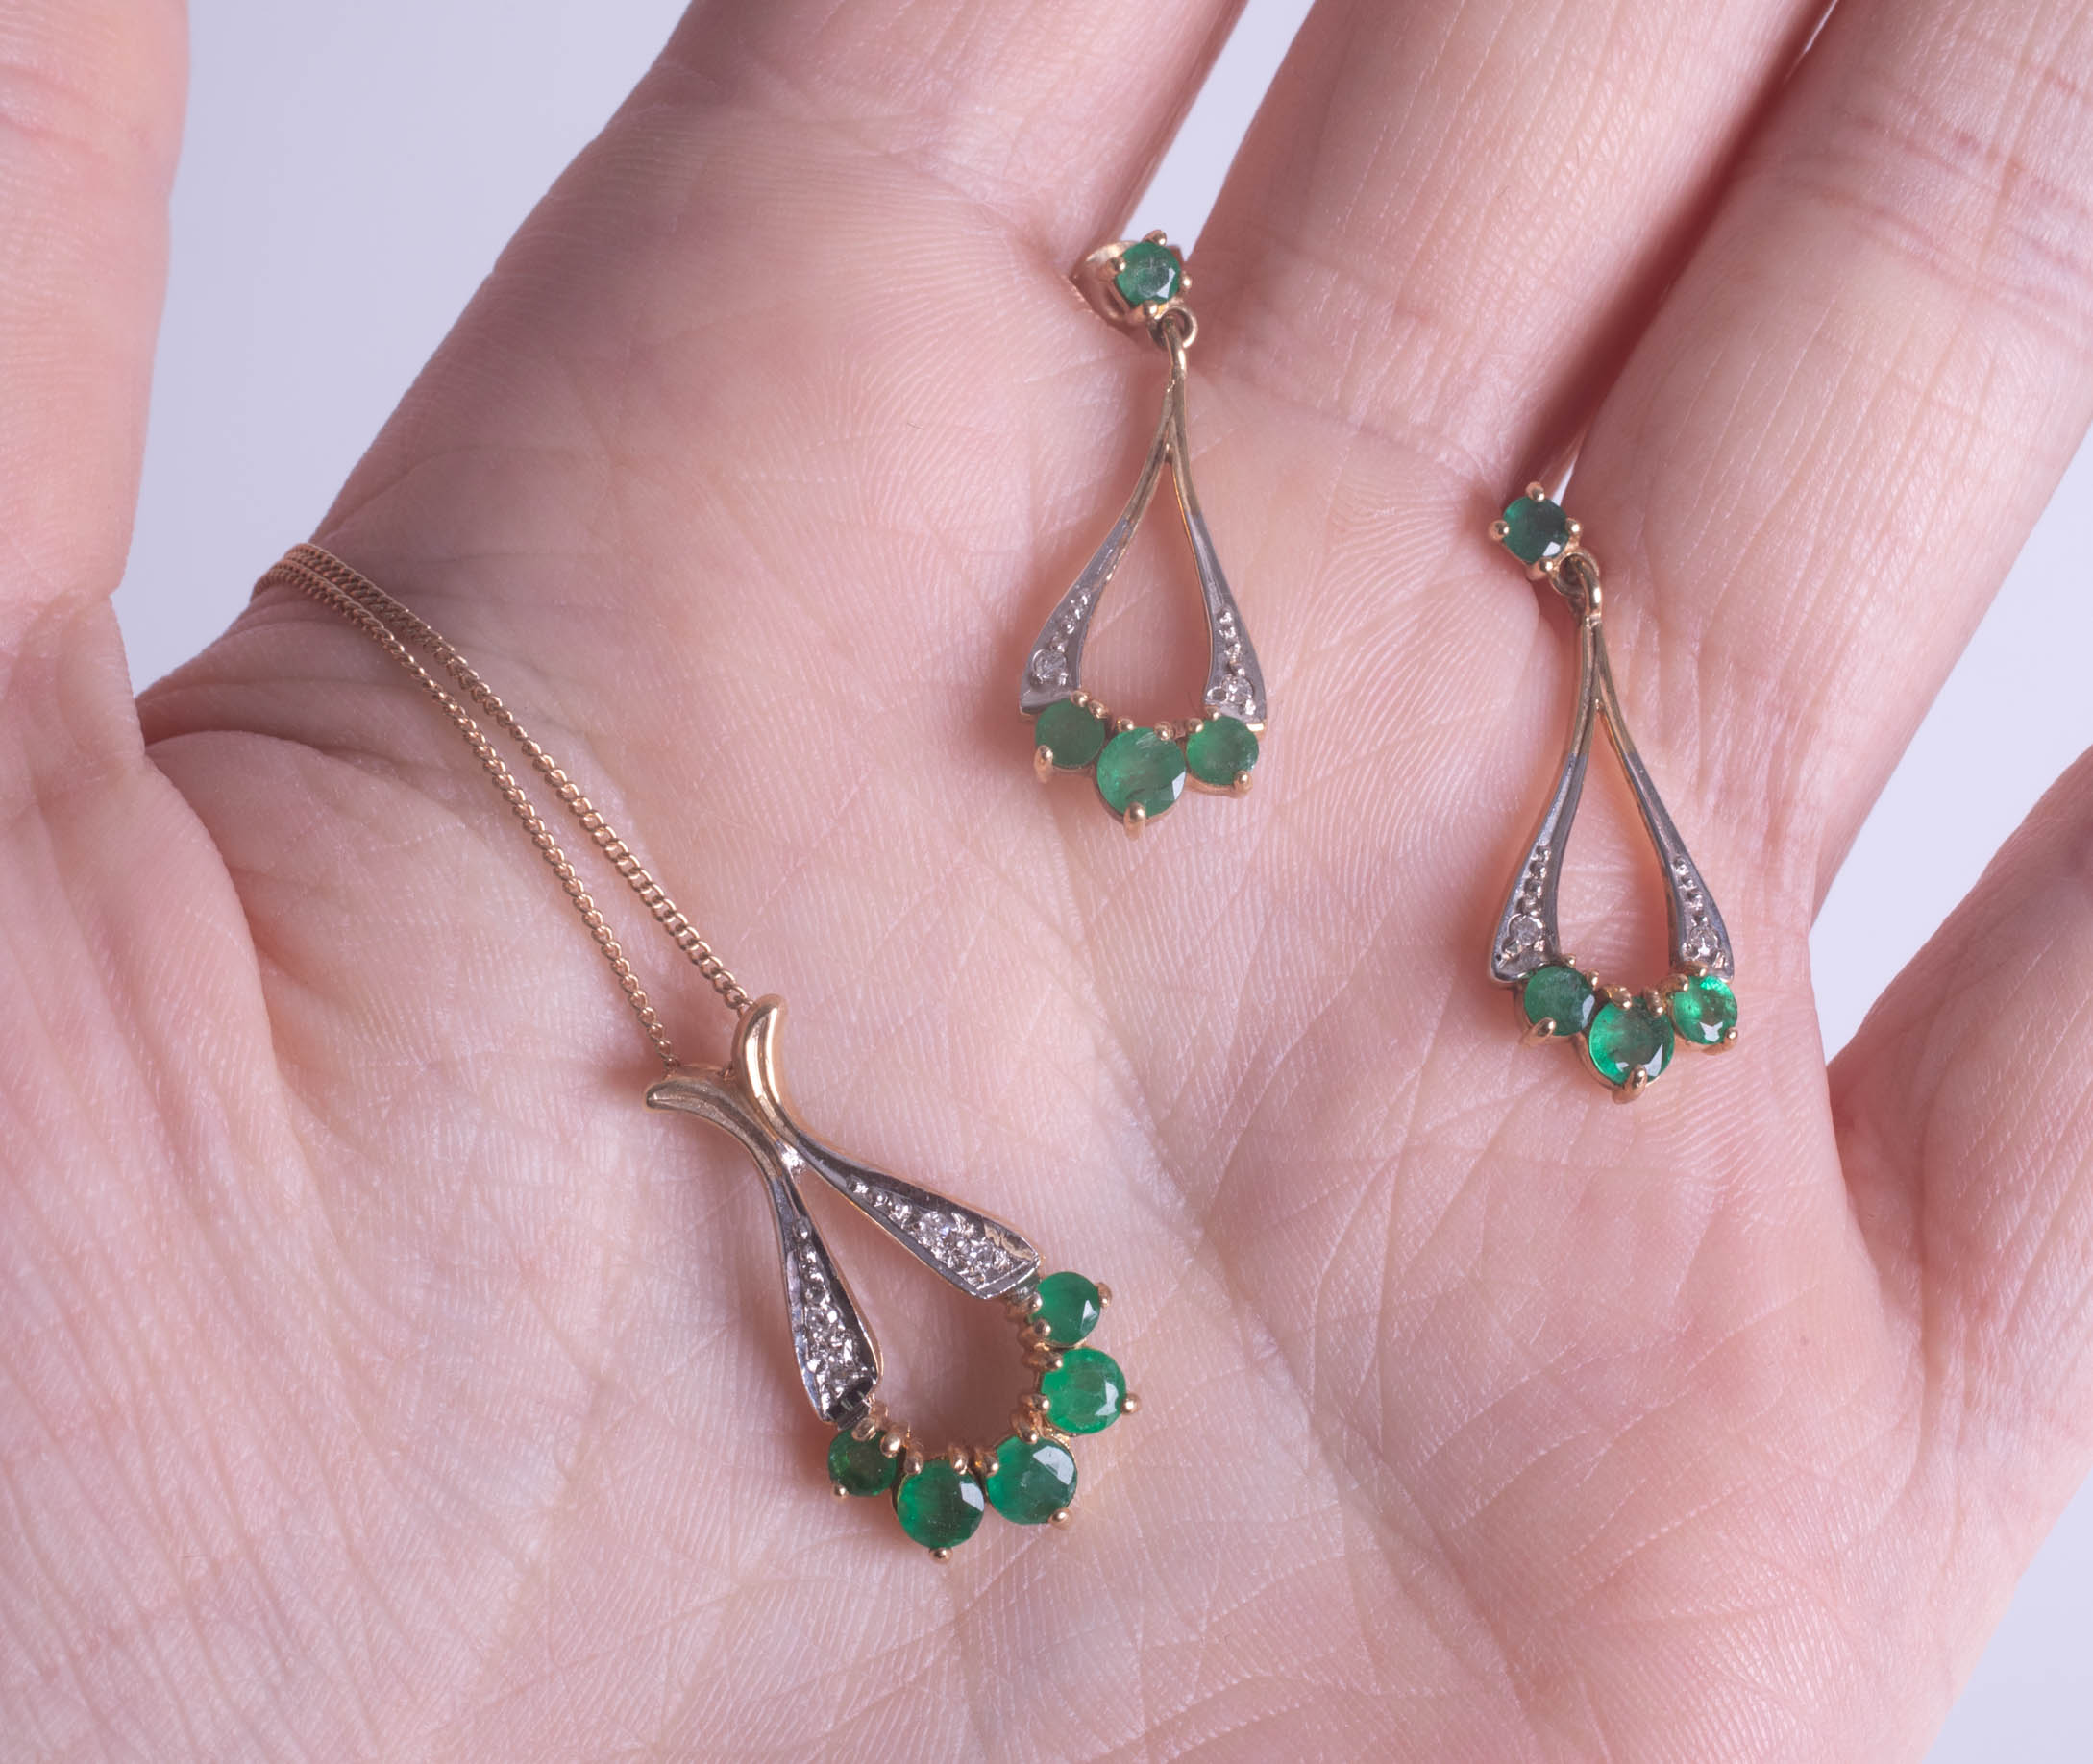 A 9ct emerald and diamond pendant and earring set.